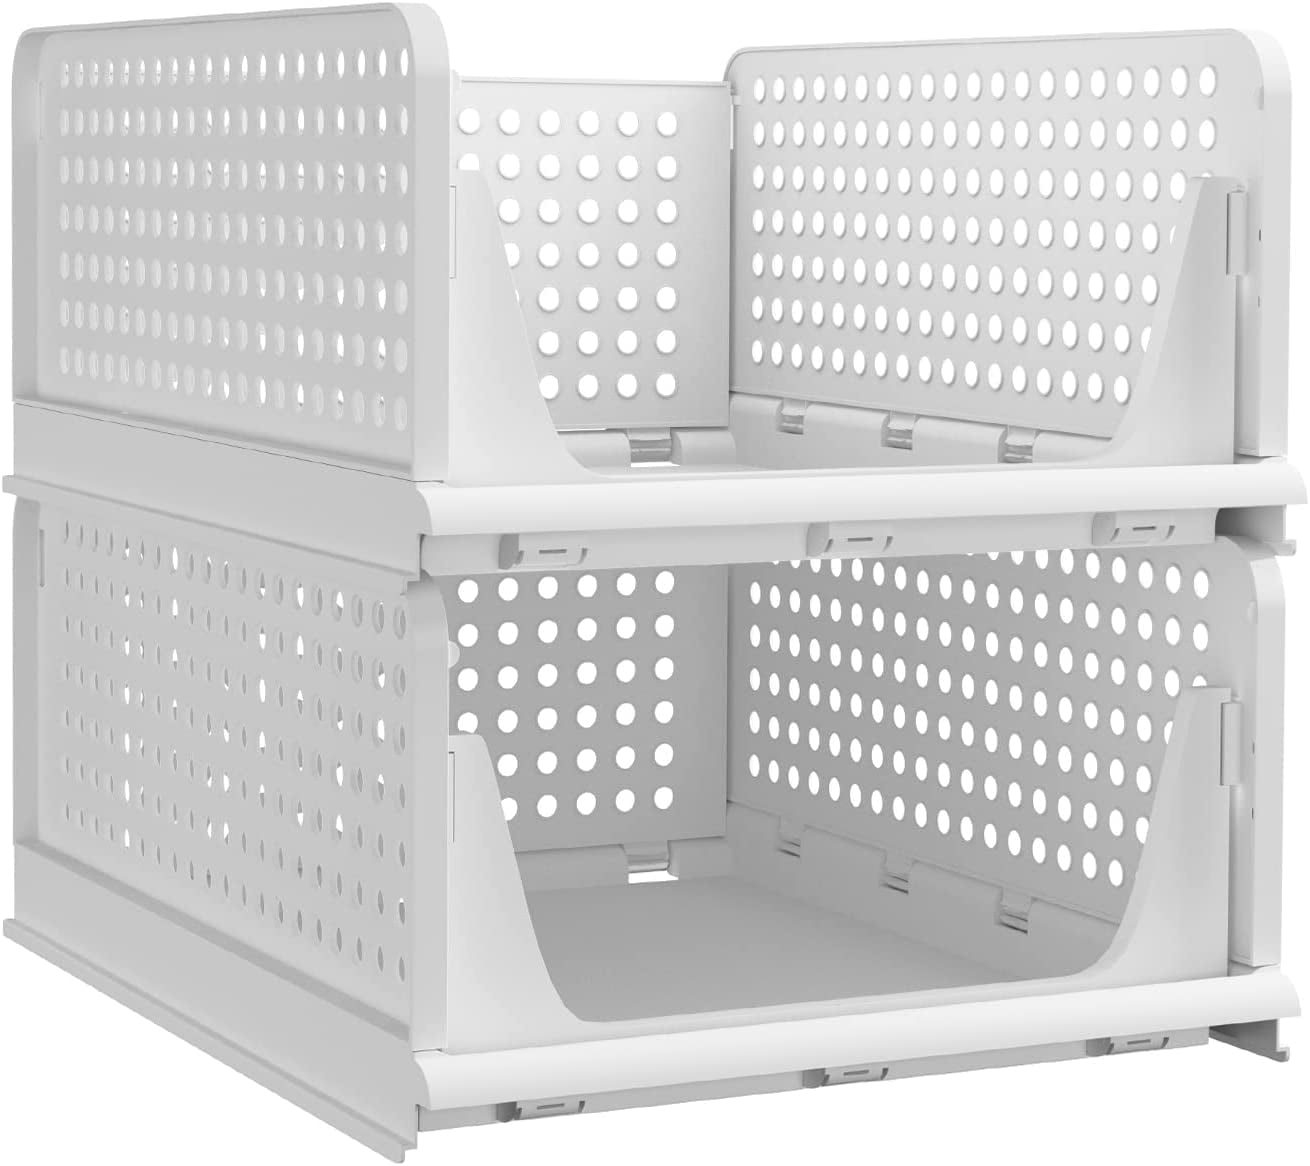 Dropship 4 Packs Plastic Storage Box Closet Organizer Foldable Storage Bin  Stackable Drawer With Slide Rail Push-Pull Storage Basket For Living Room  Bedroom Wardrobe White to Sell Online at a Lower Price